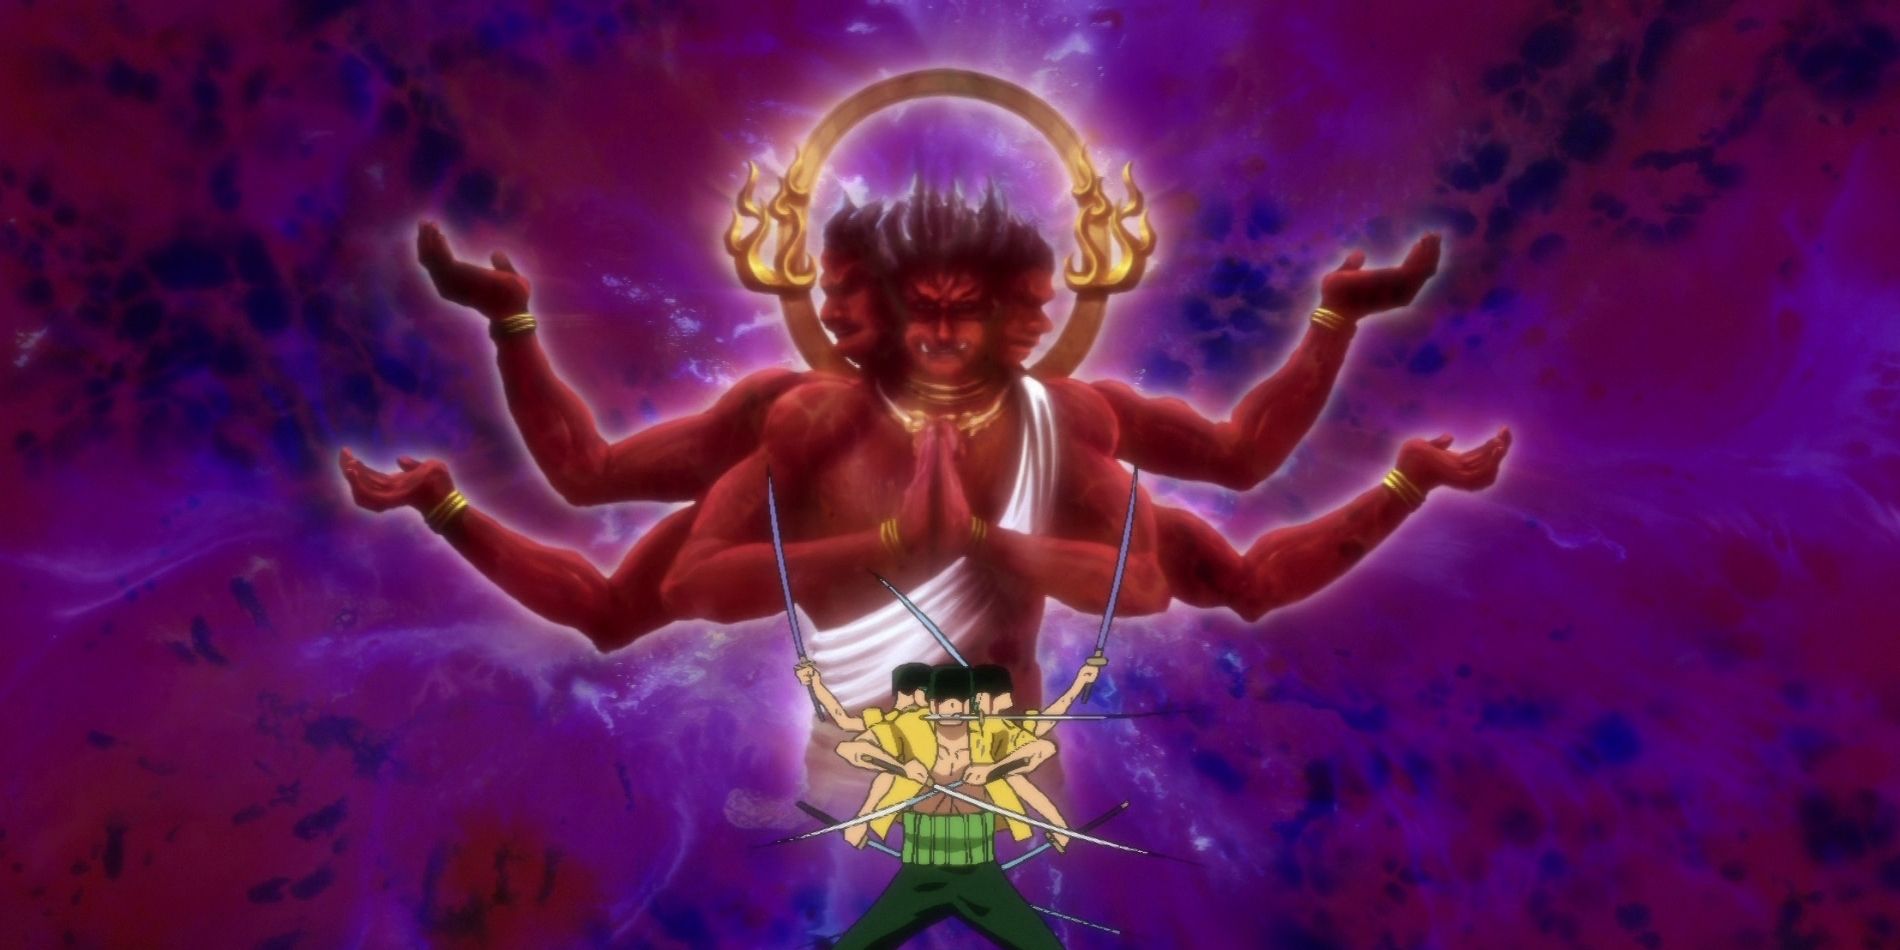 Zoro uses Asura for the first time